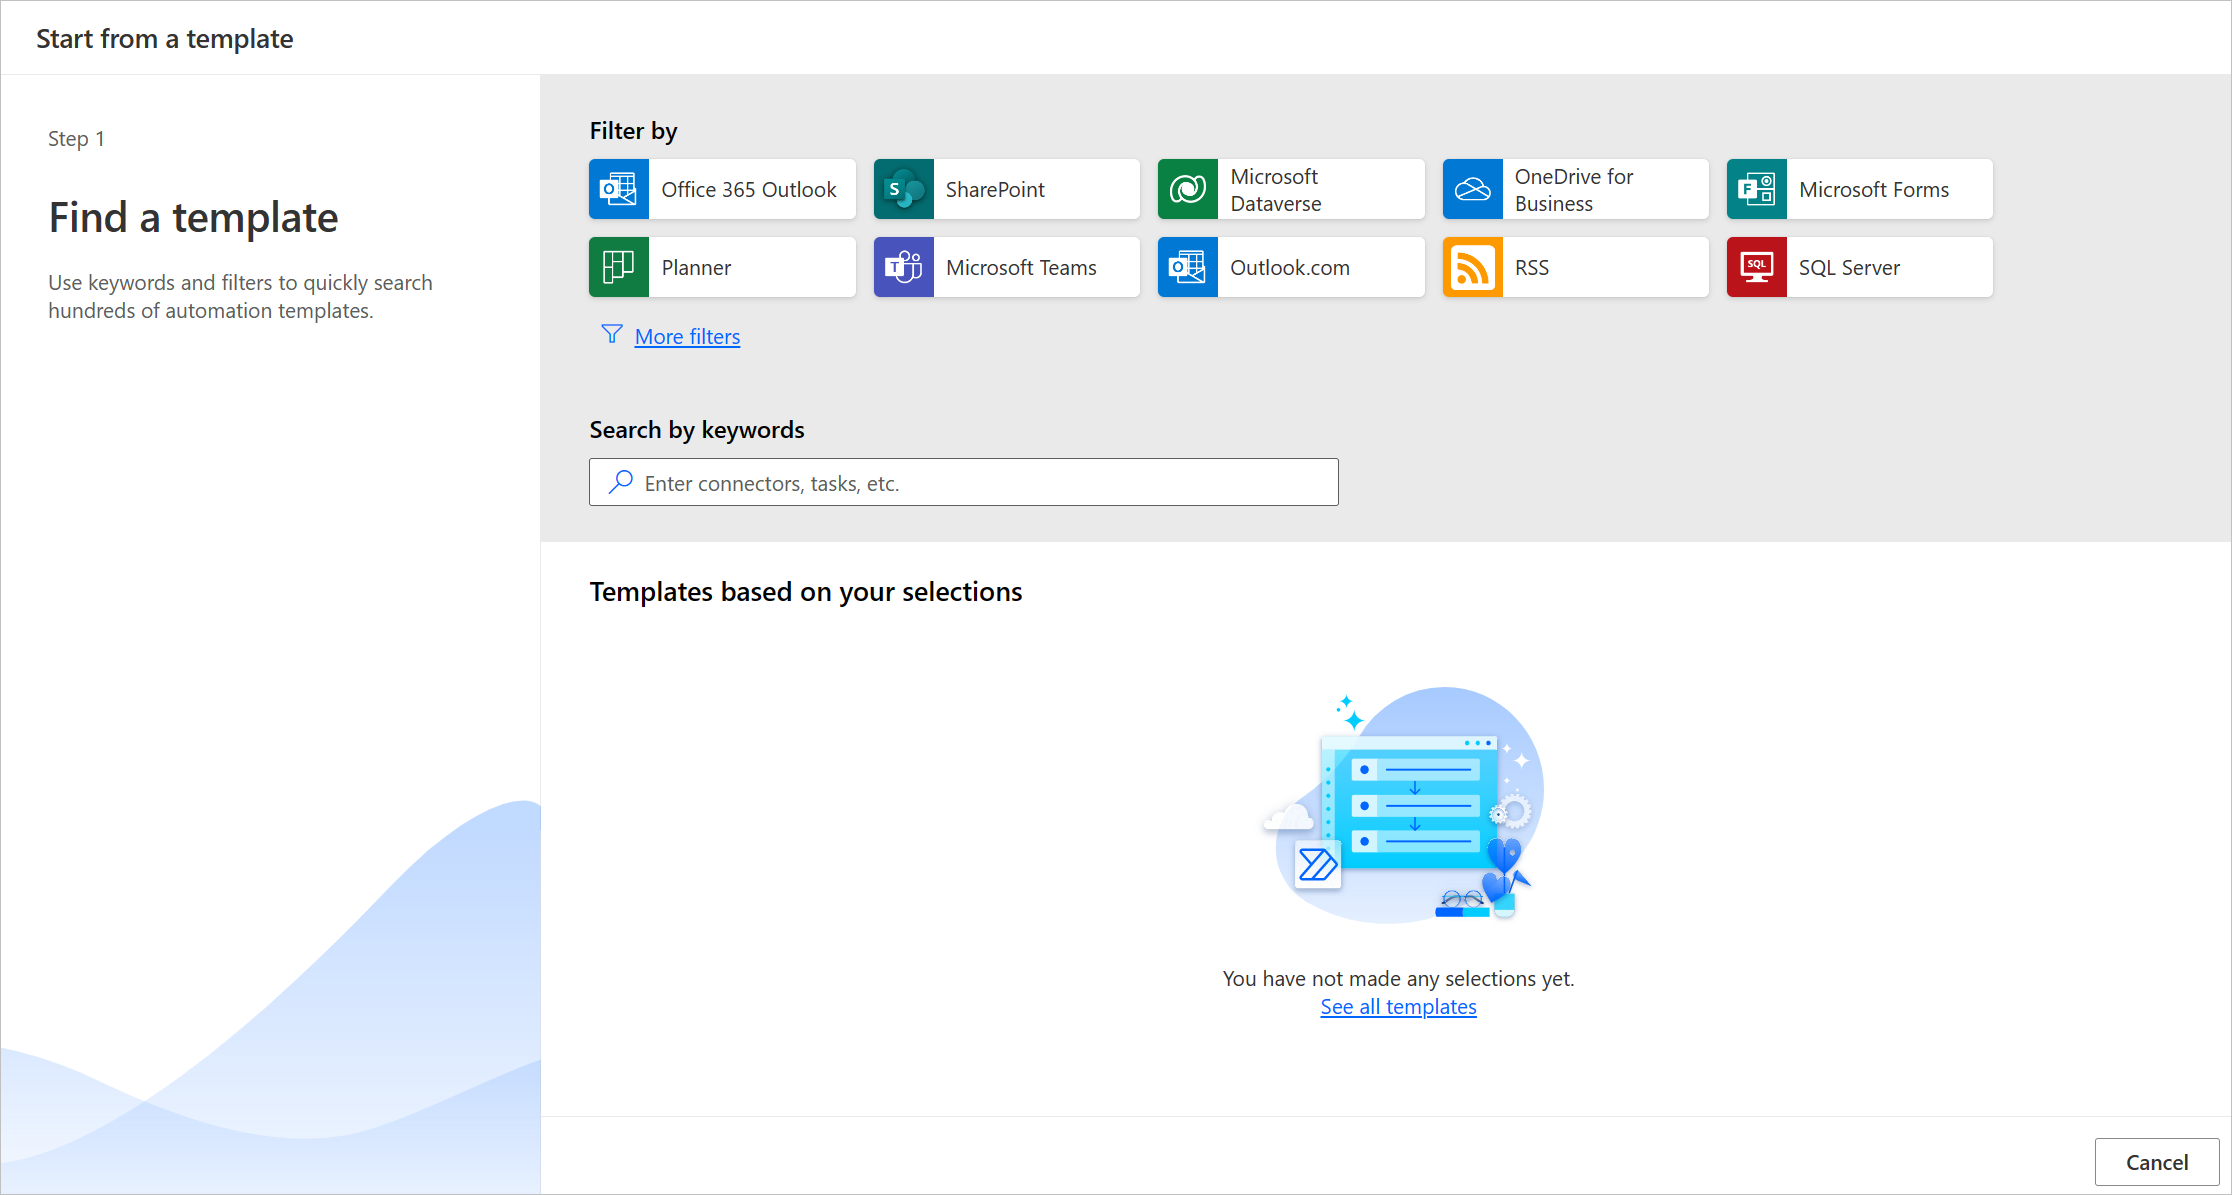 Screenshot of Power Automate templates related to Microsoft Forms.